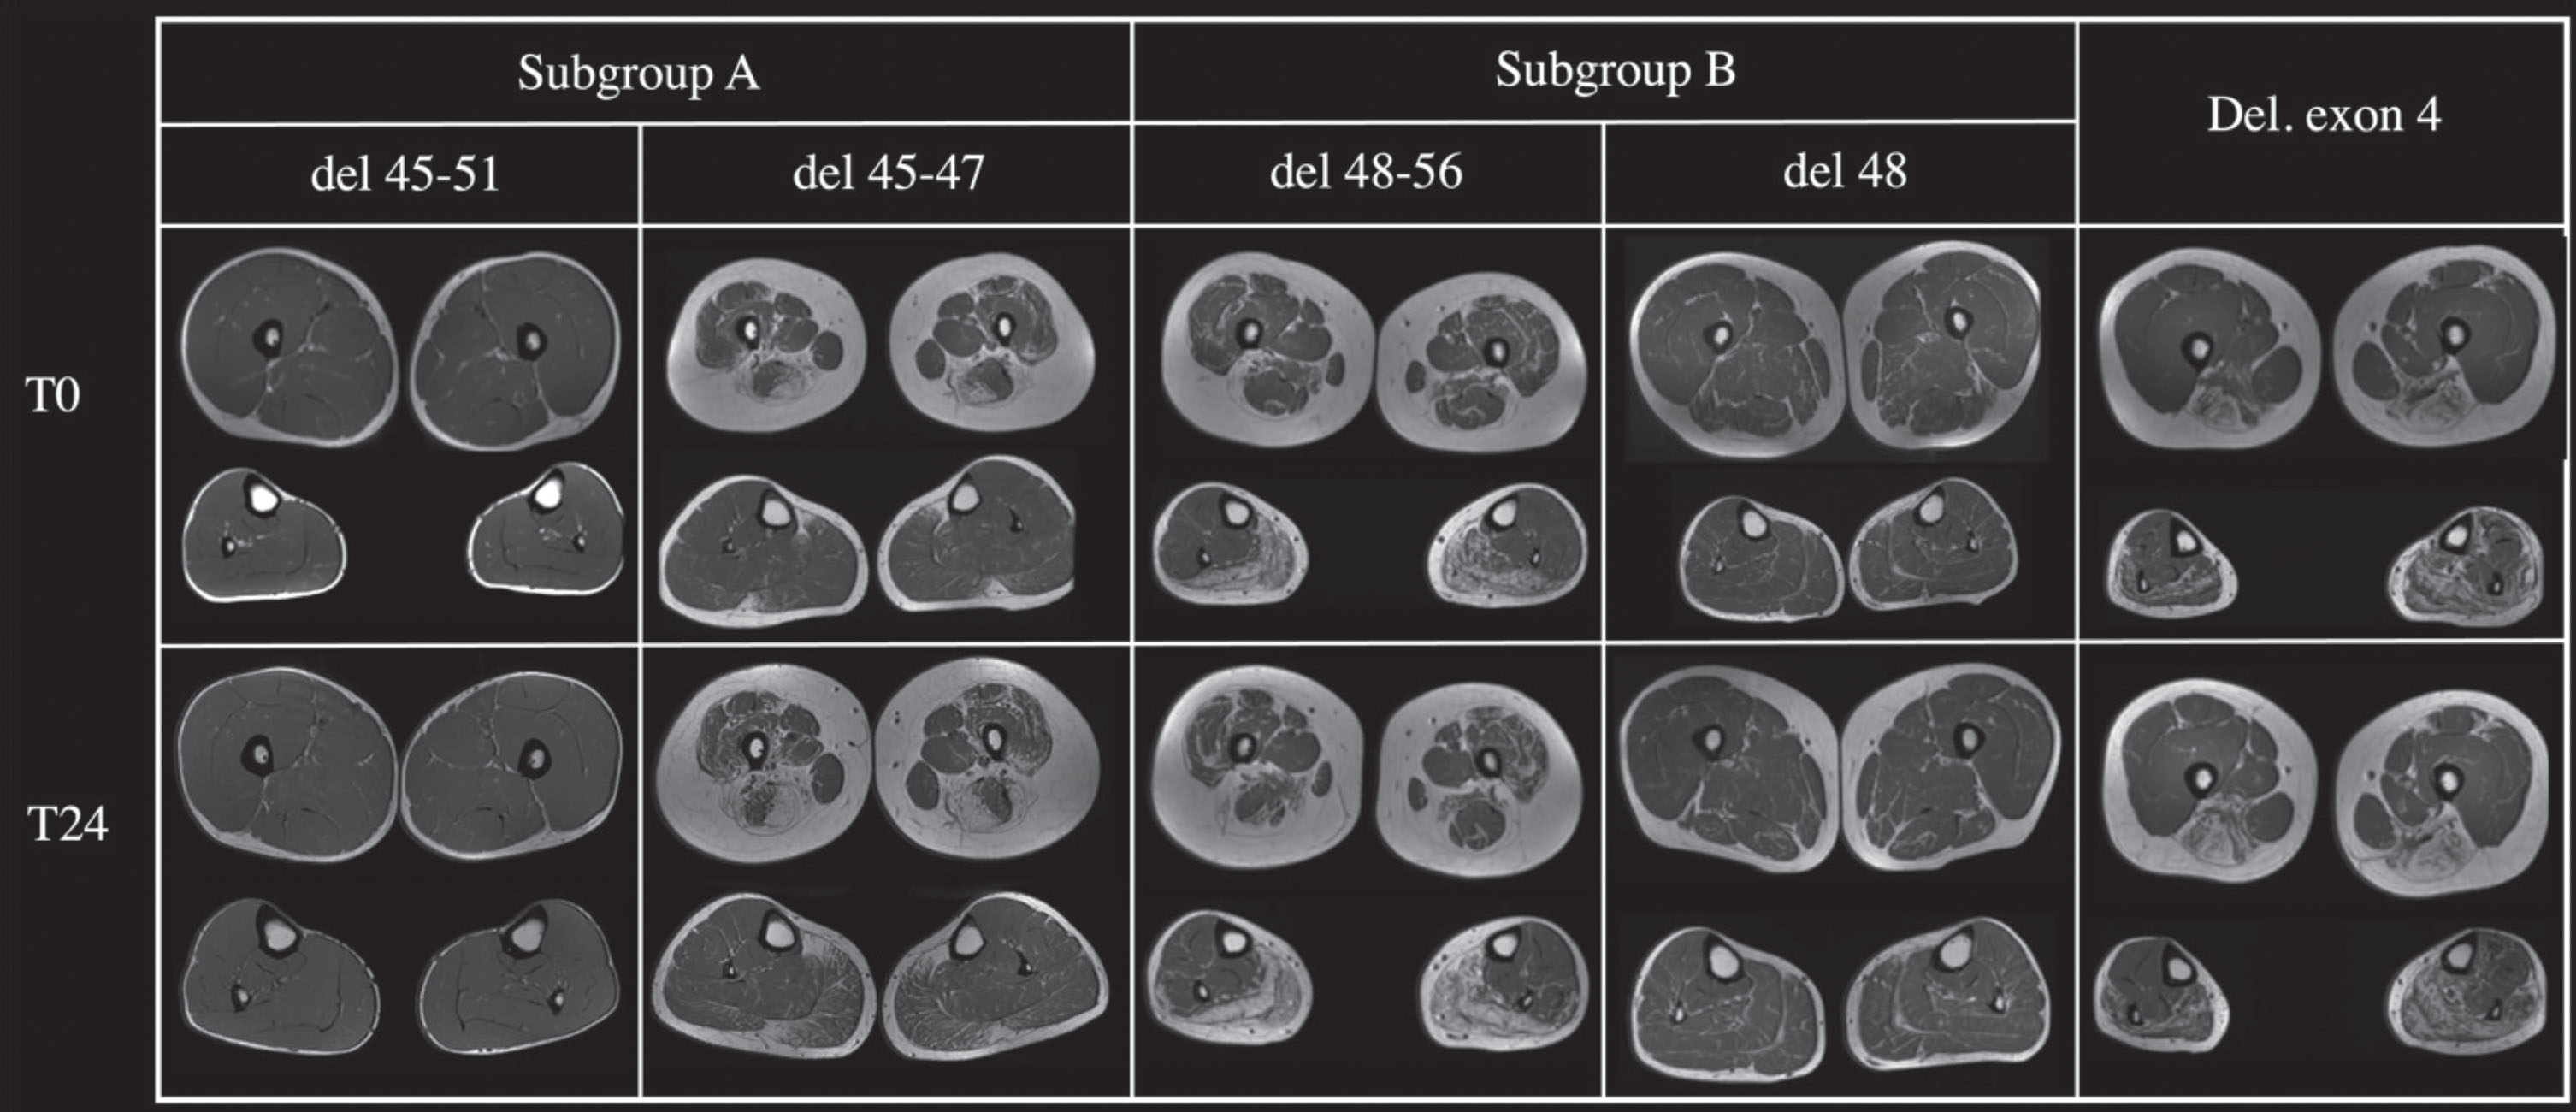 The Figure shows muscle thighs and legs MRI at baseline (T0) and after two years follow up (T24) of five patients with different mutations.